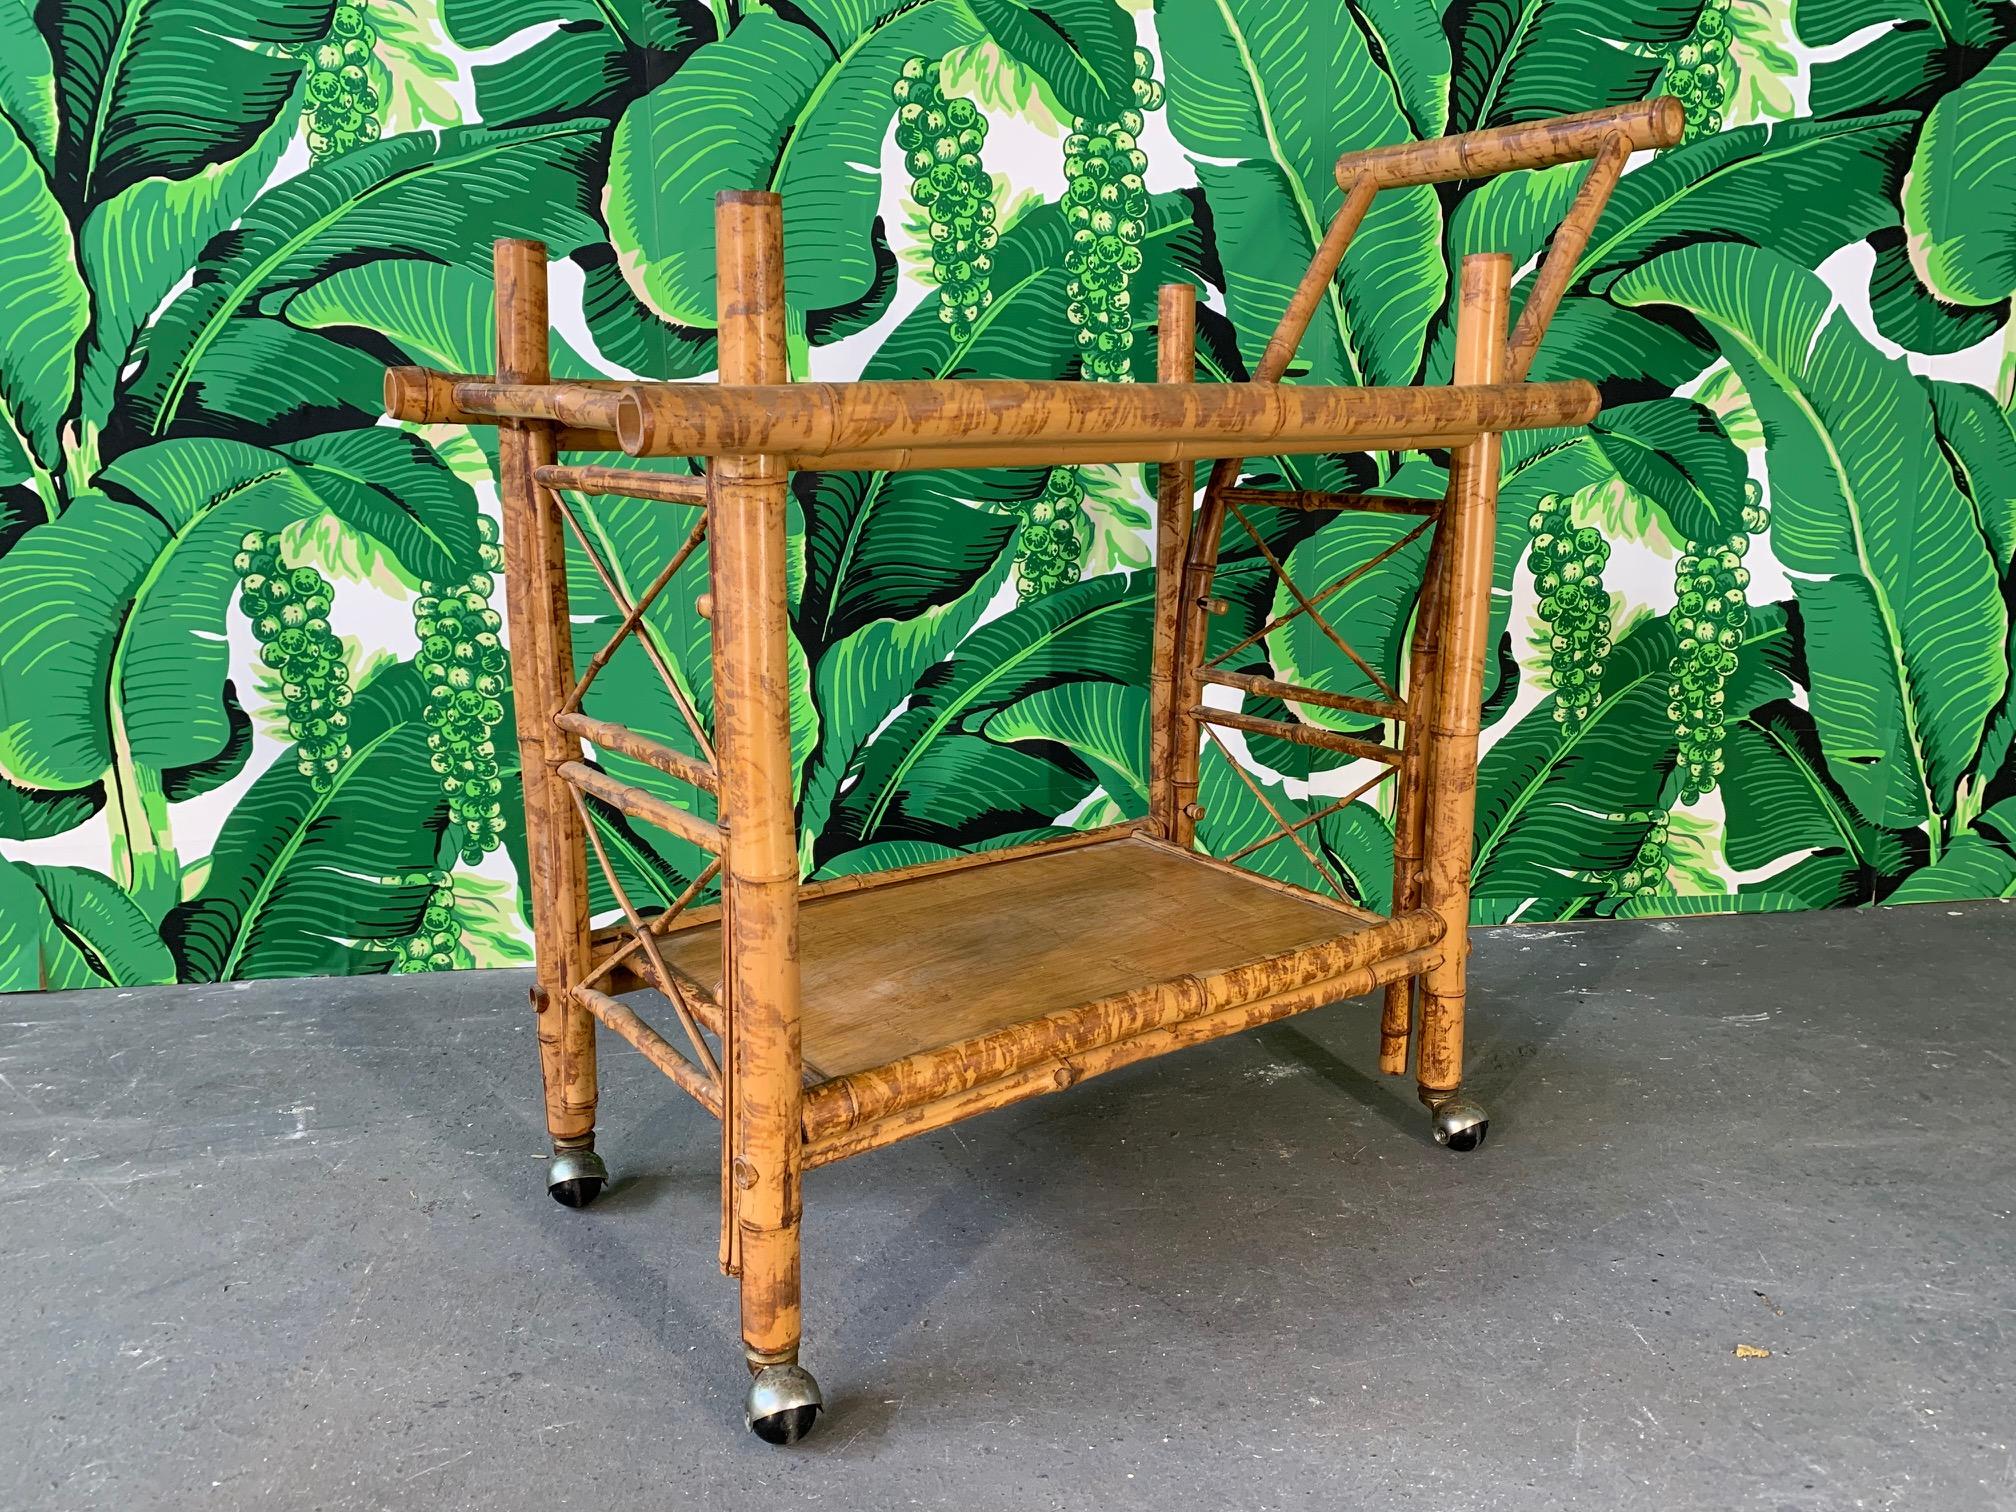 Vintage bar or tea cart in tiger bamboo features a collapsible design allowing for simple deconstruction for easy storage or transport. All pieces assemble with attached bamboo pins. Brass castors for smooth rolling into any room. Very good